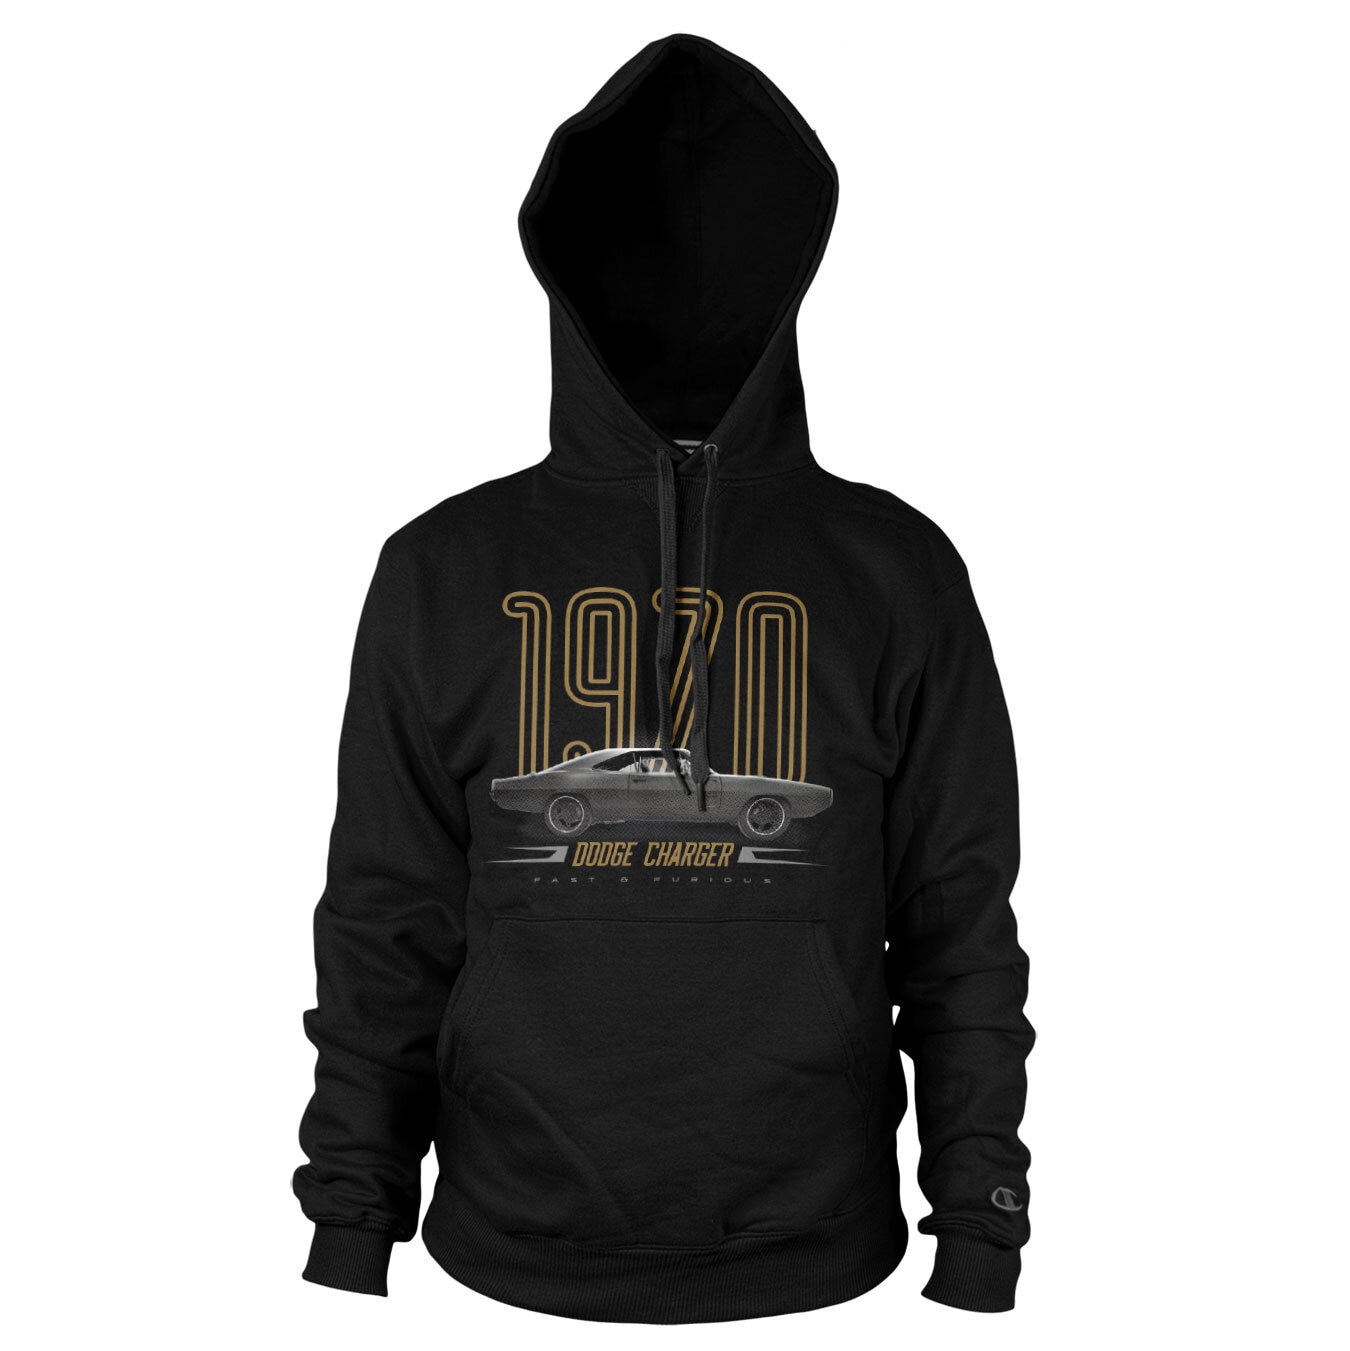 1970 Dodge Charger Hoodie